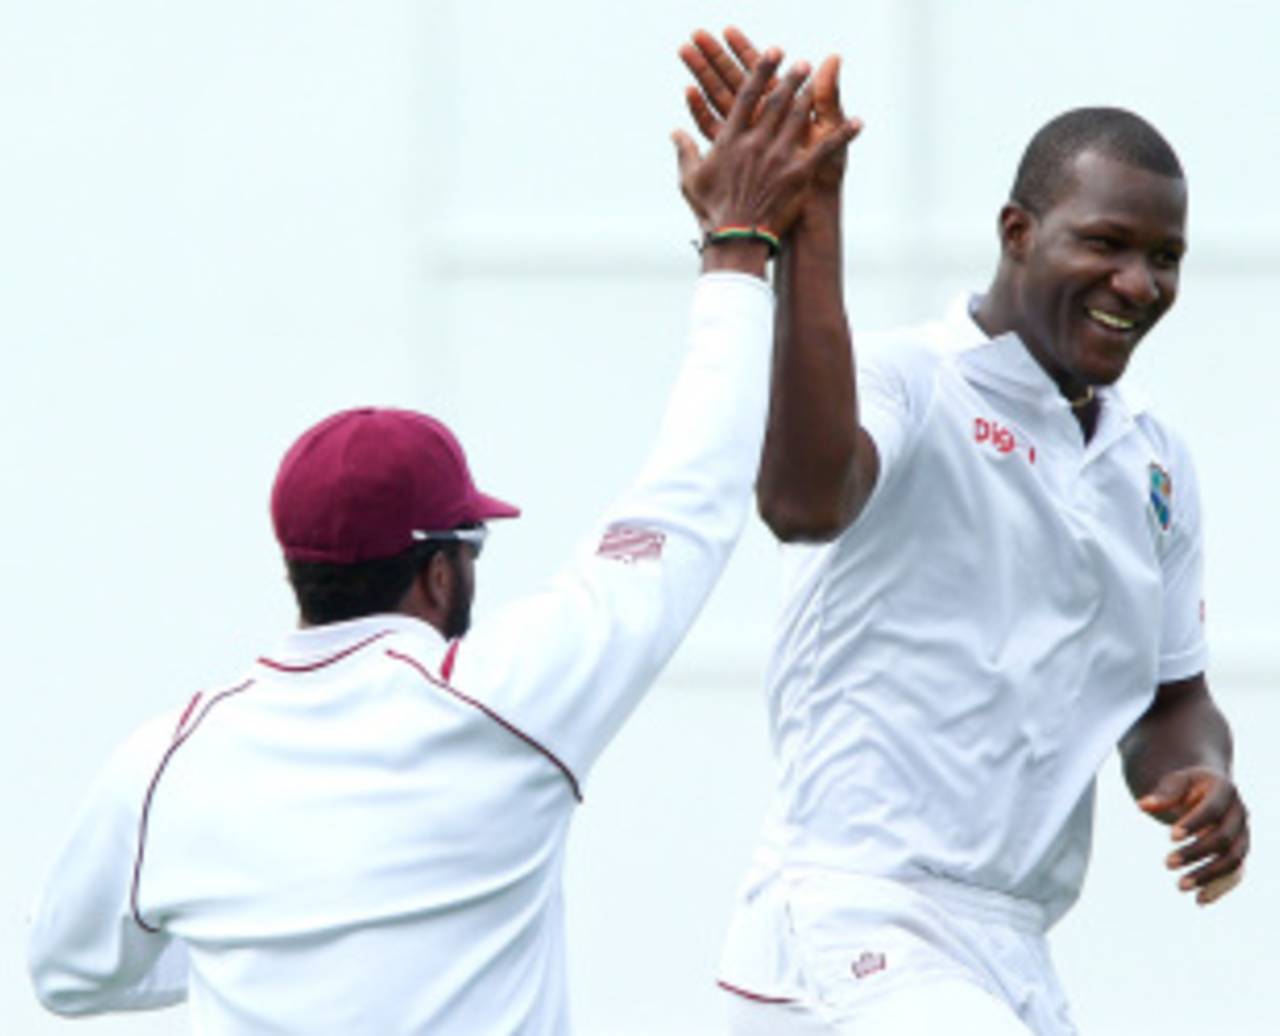 Darren Sammy says it's time the West Indies Test team "moves in a new direction".&nbsp;&nbsp;&bull;&nbsp;&nbsp;Getty Images